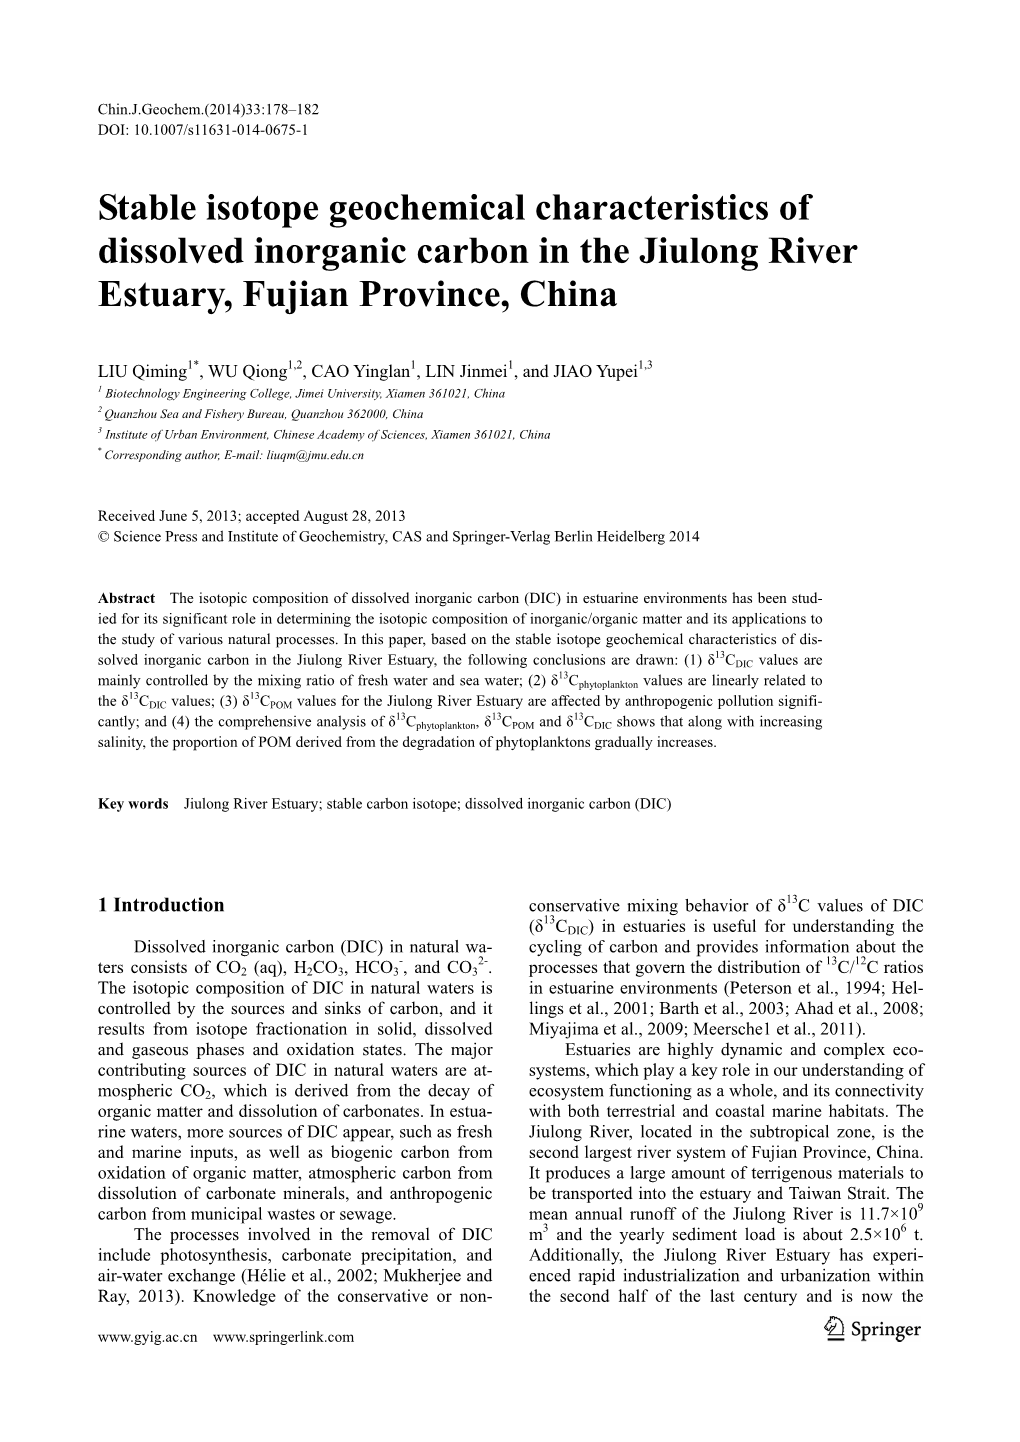 Stable Isotope Geochemical Characteristics of Dissolved Inorganic Carbon in the Jiulong River Estuary, Fujian Province, China